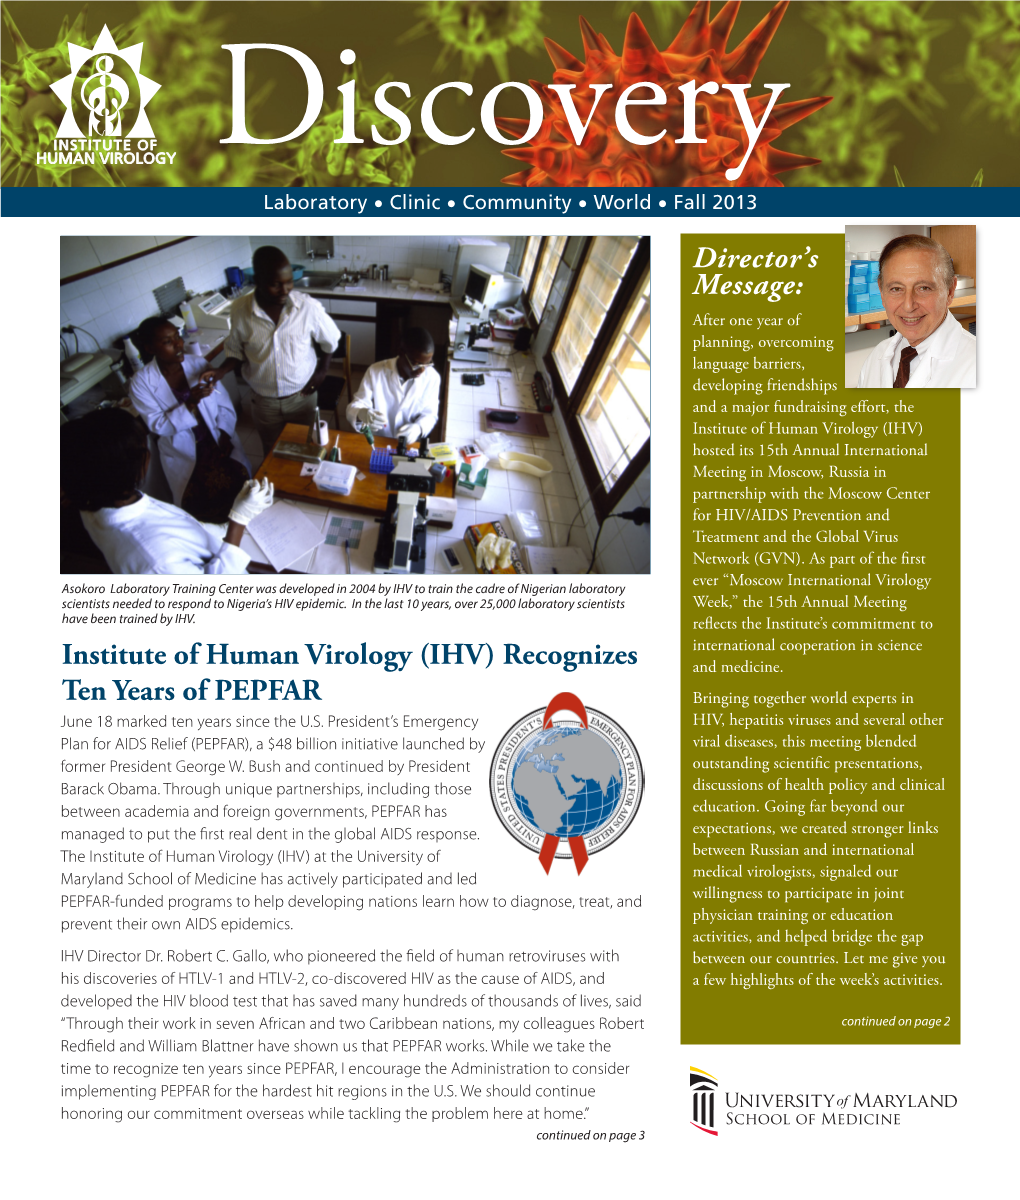 Institute of Human Virology (IHV) Recognizes Ten Years of PEPFAR (Continued from Cover)